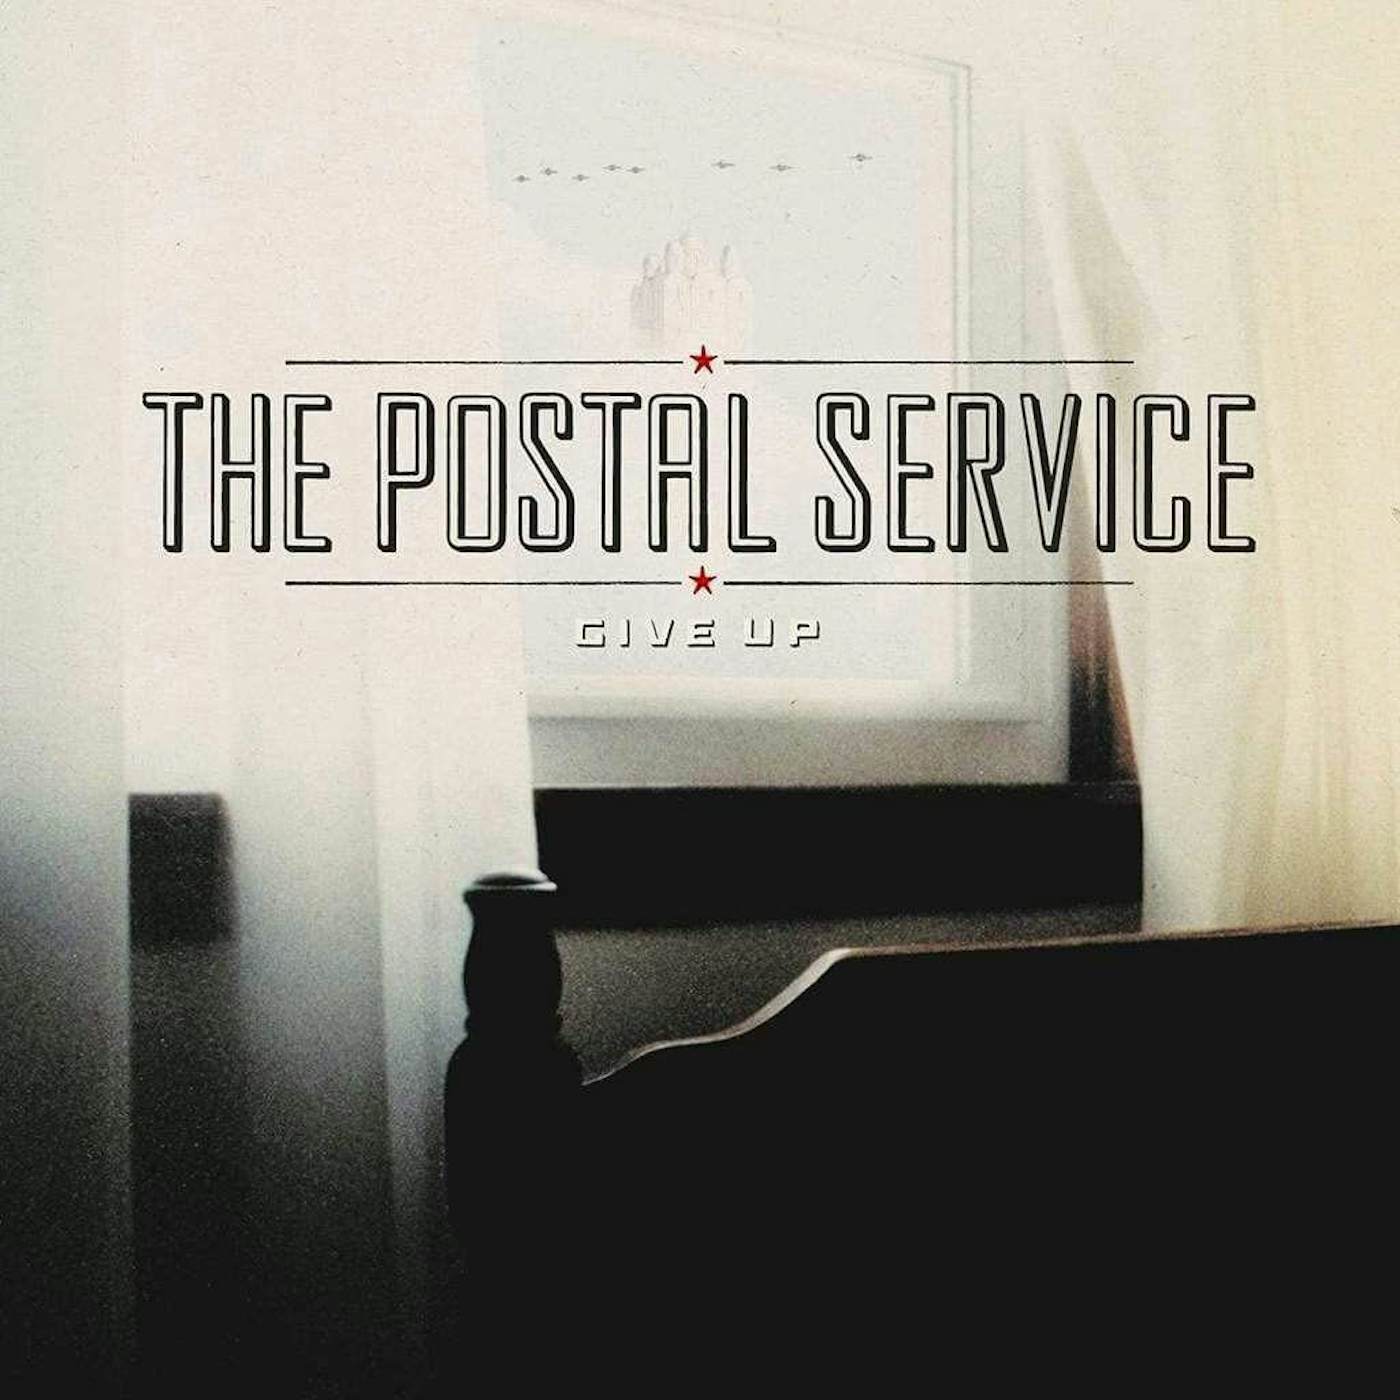 The Postal Service Give Up (Limited Edition, Blue w/ Metallic Silver) Vinyl Record